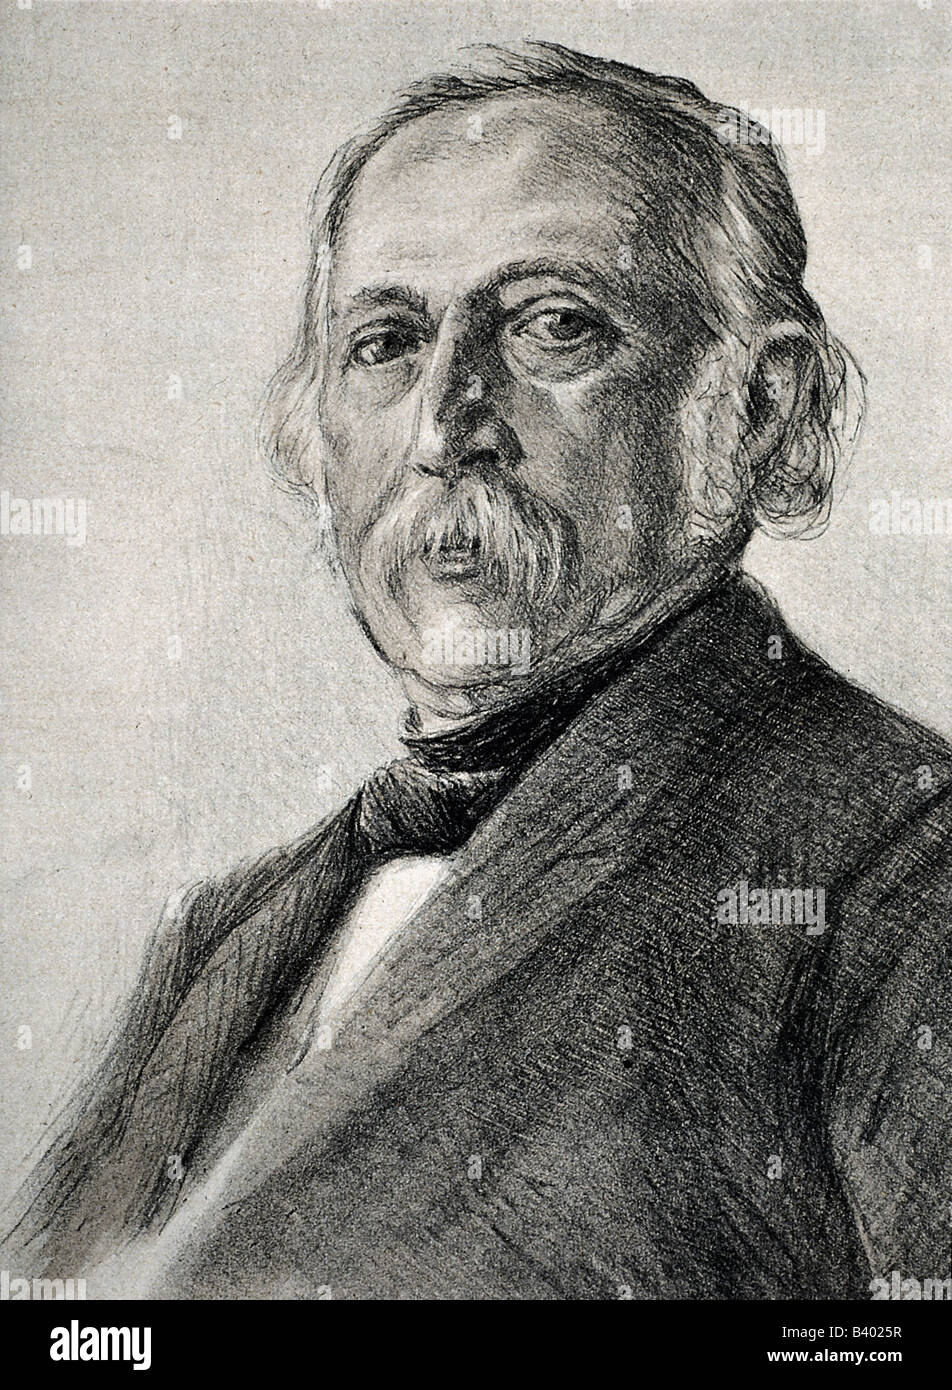 Fontane, Theodor, 30.12.1819 - 20.9.1898, German author / writer, poet, portrait, drawing by Max Liebermann (1847 - 1935), 19th century, , Stock Photo